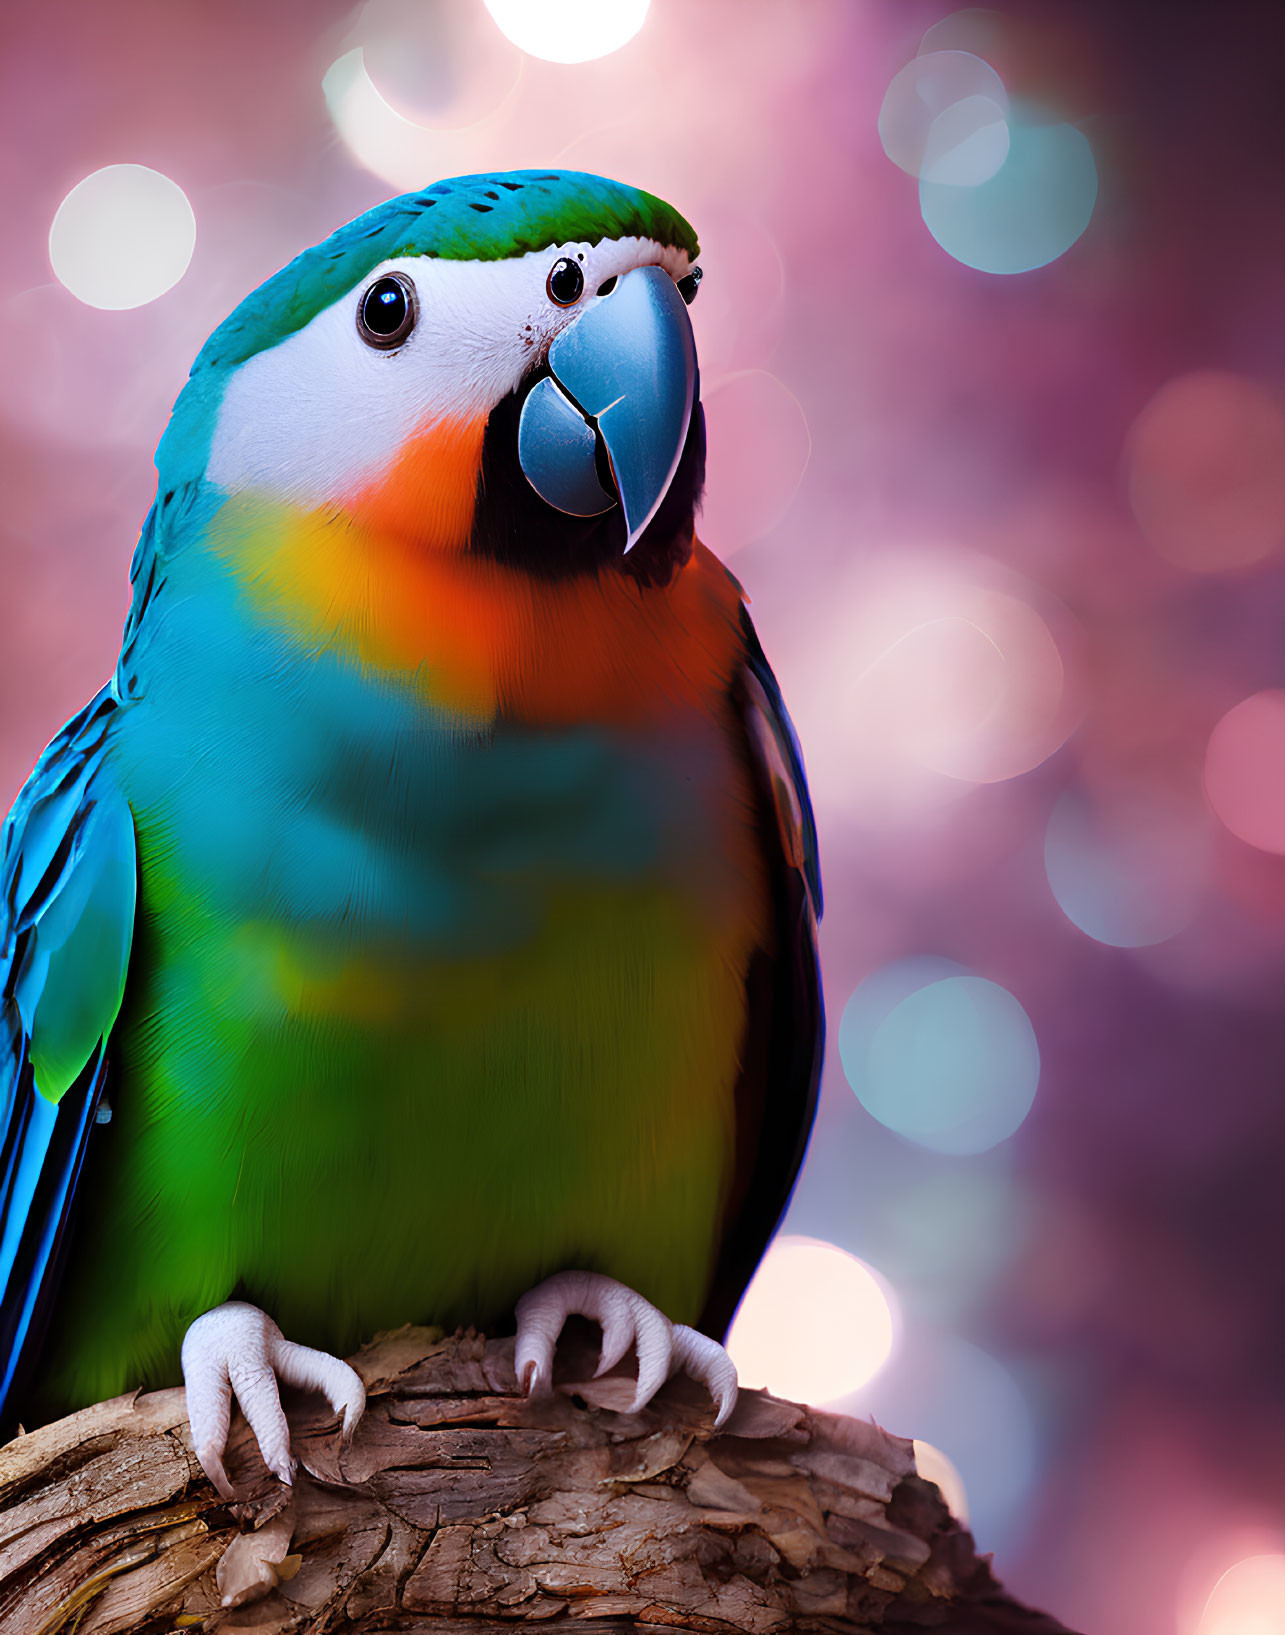 Vibrant blue and green parrot on wooden stump with pink bokeh background